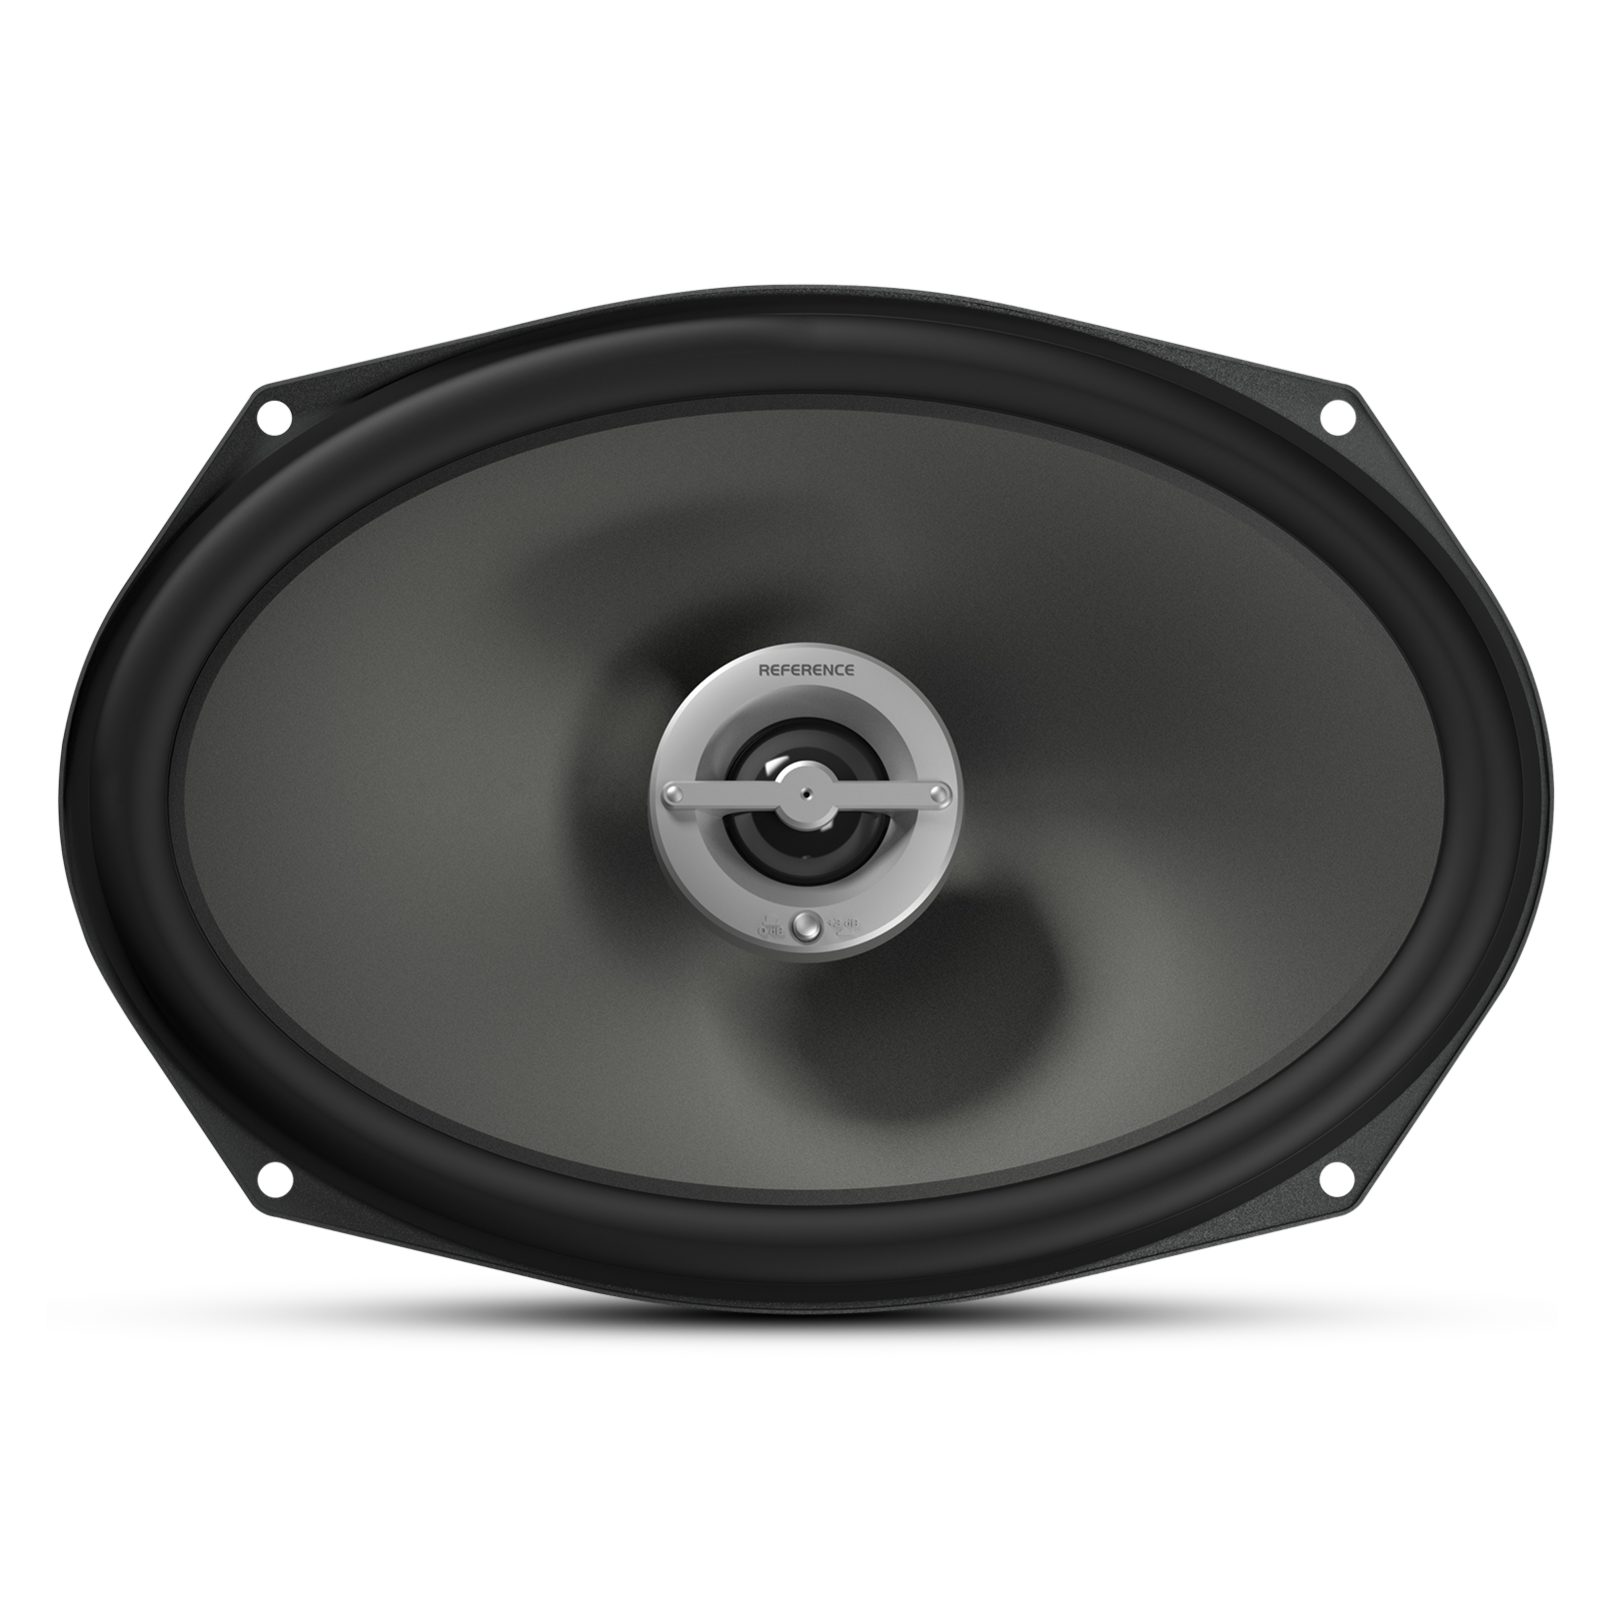 Reference 9602ix - Black - Integrated 5-1/4" woofer with coaxially mounted tweeter - Detailshot 1